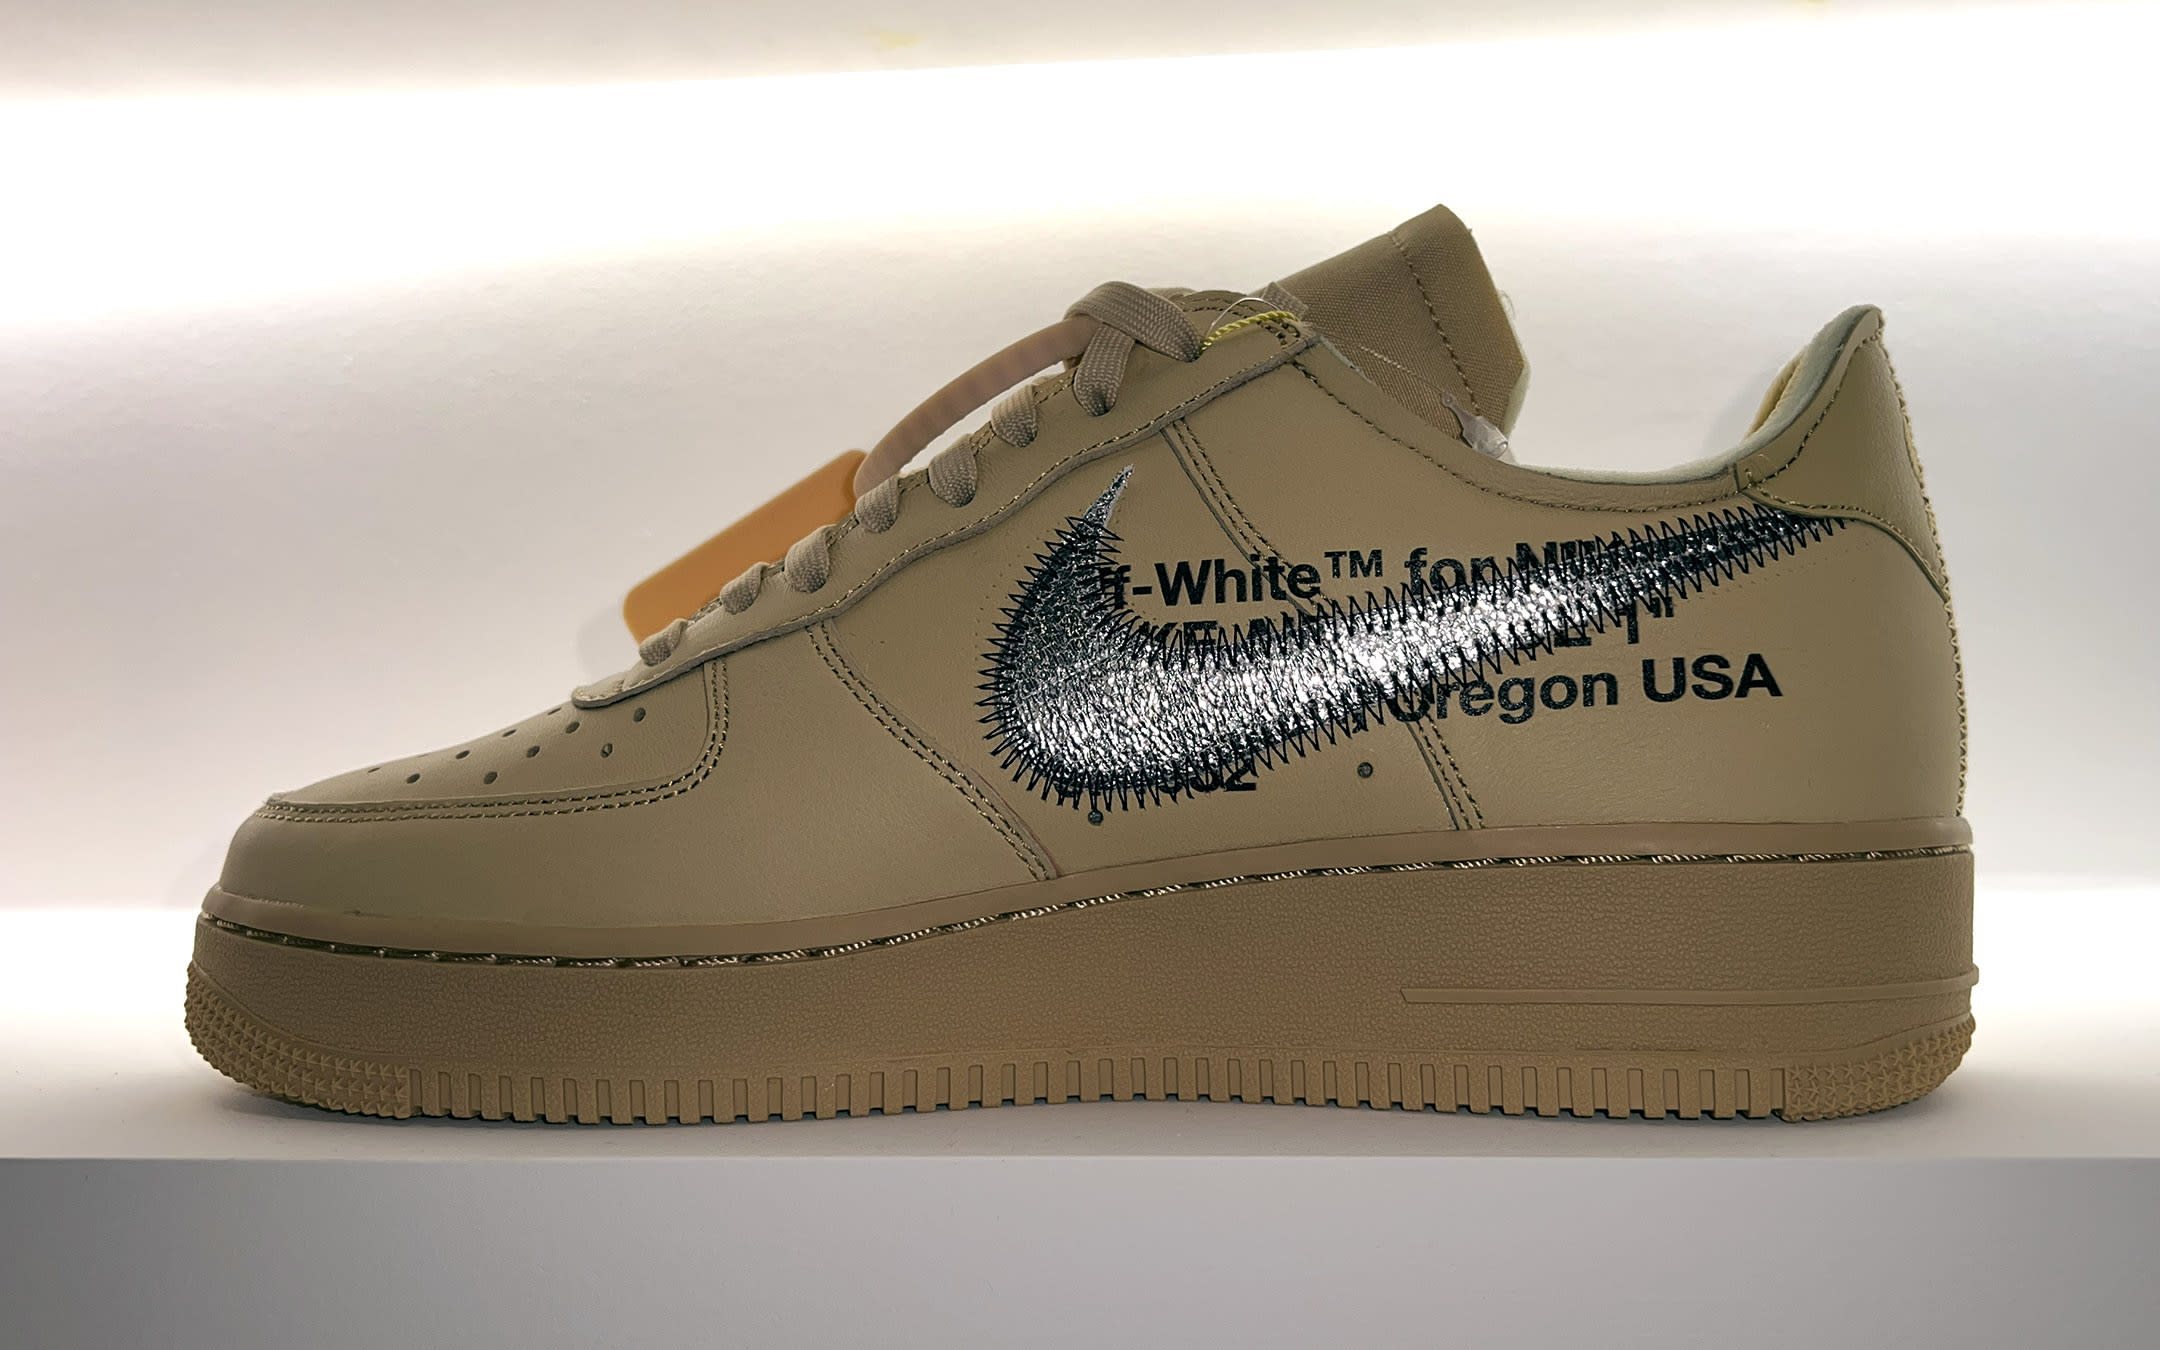 Virgil “Teasing” the MoMA Air Force 1 Doesn't Mean Anything